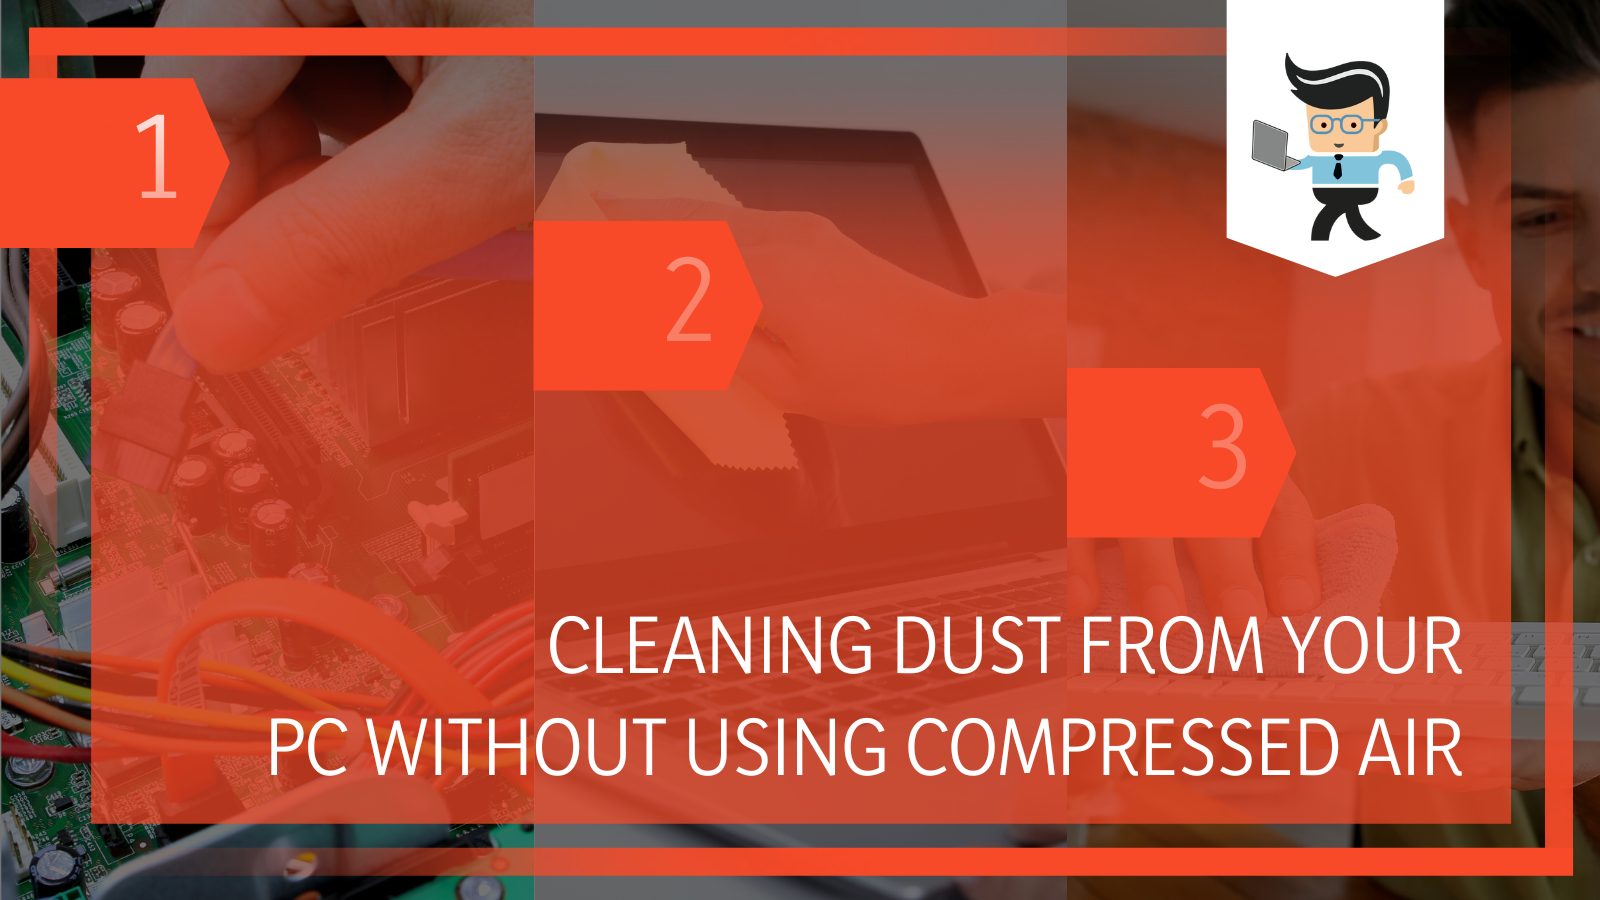 Cleaning Dust From Your PC Without Using Compressed Air